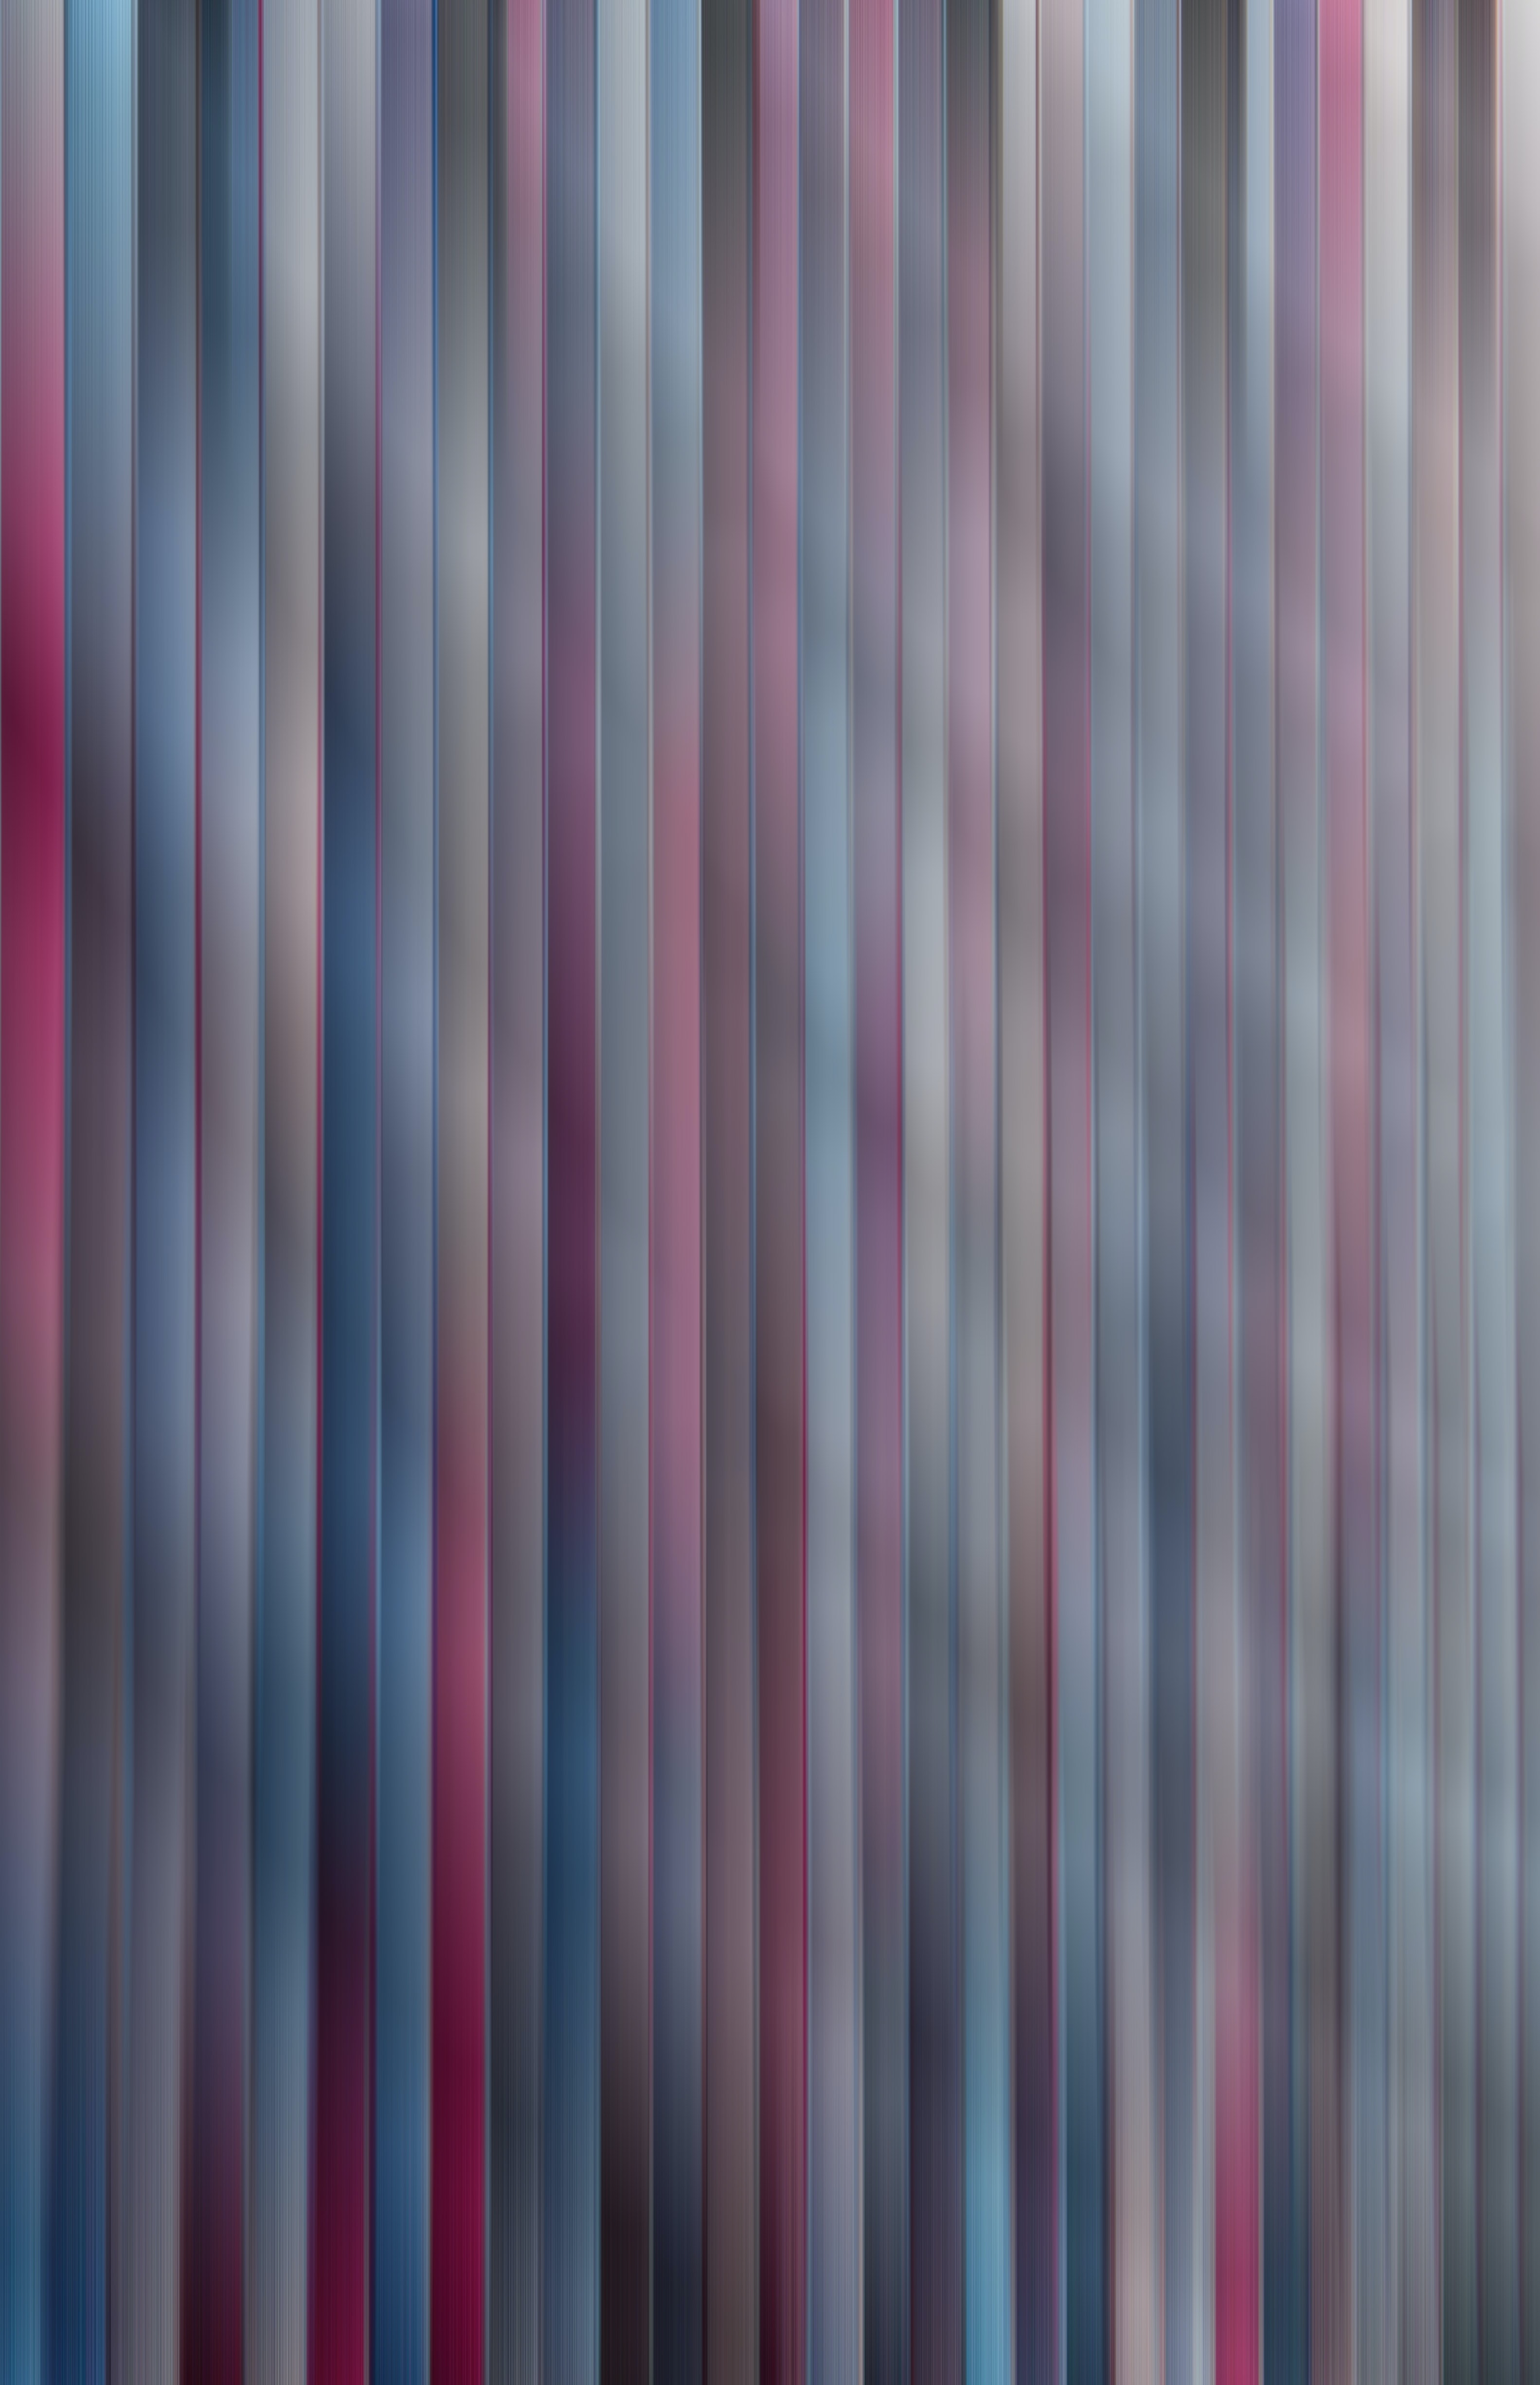 color, abstract, colors, stripes, streaks, pale 1080p